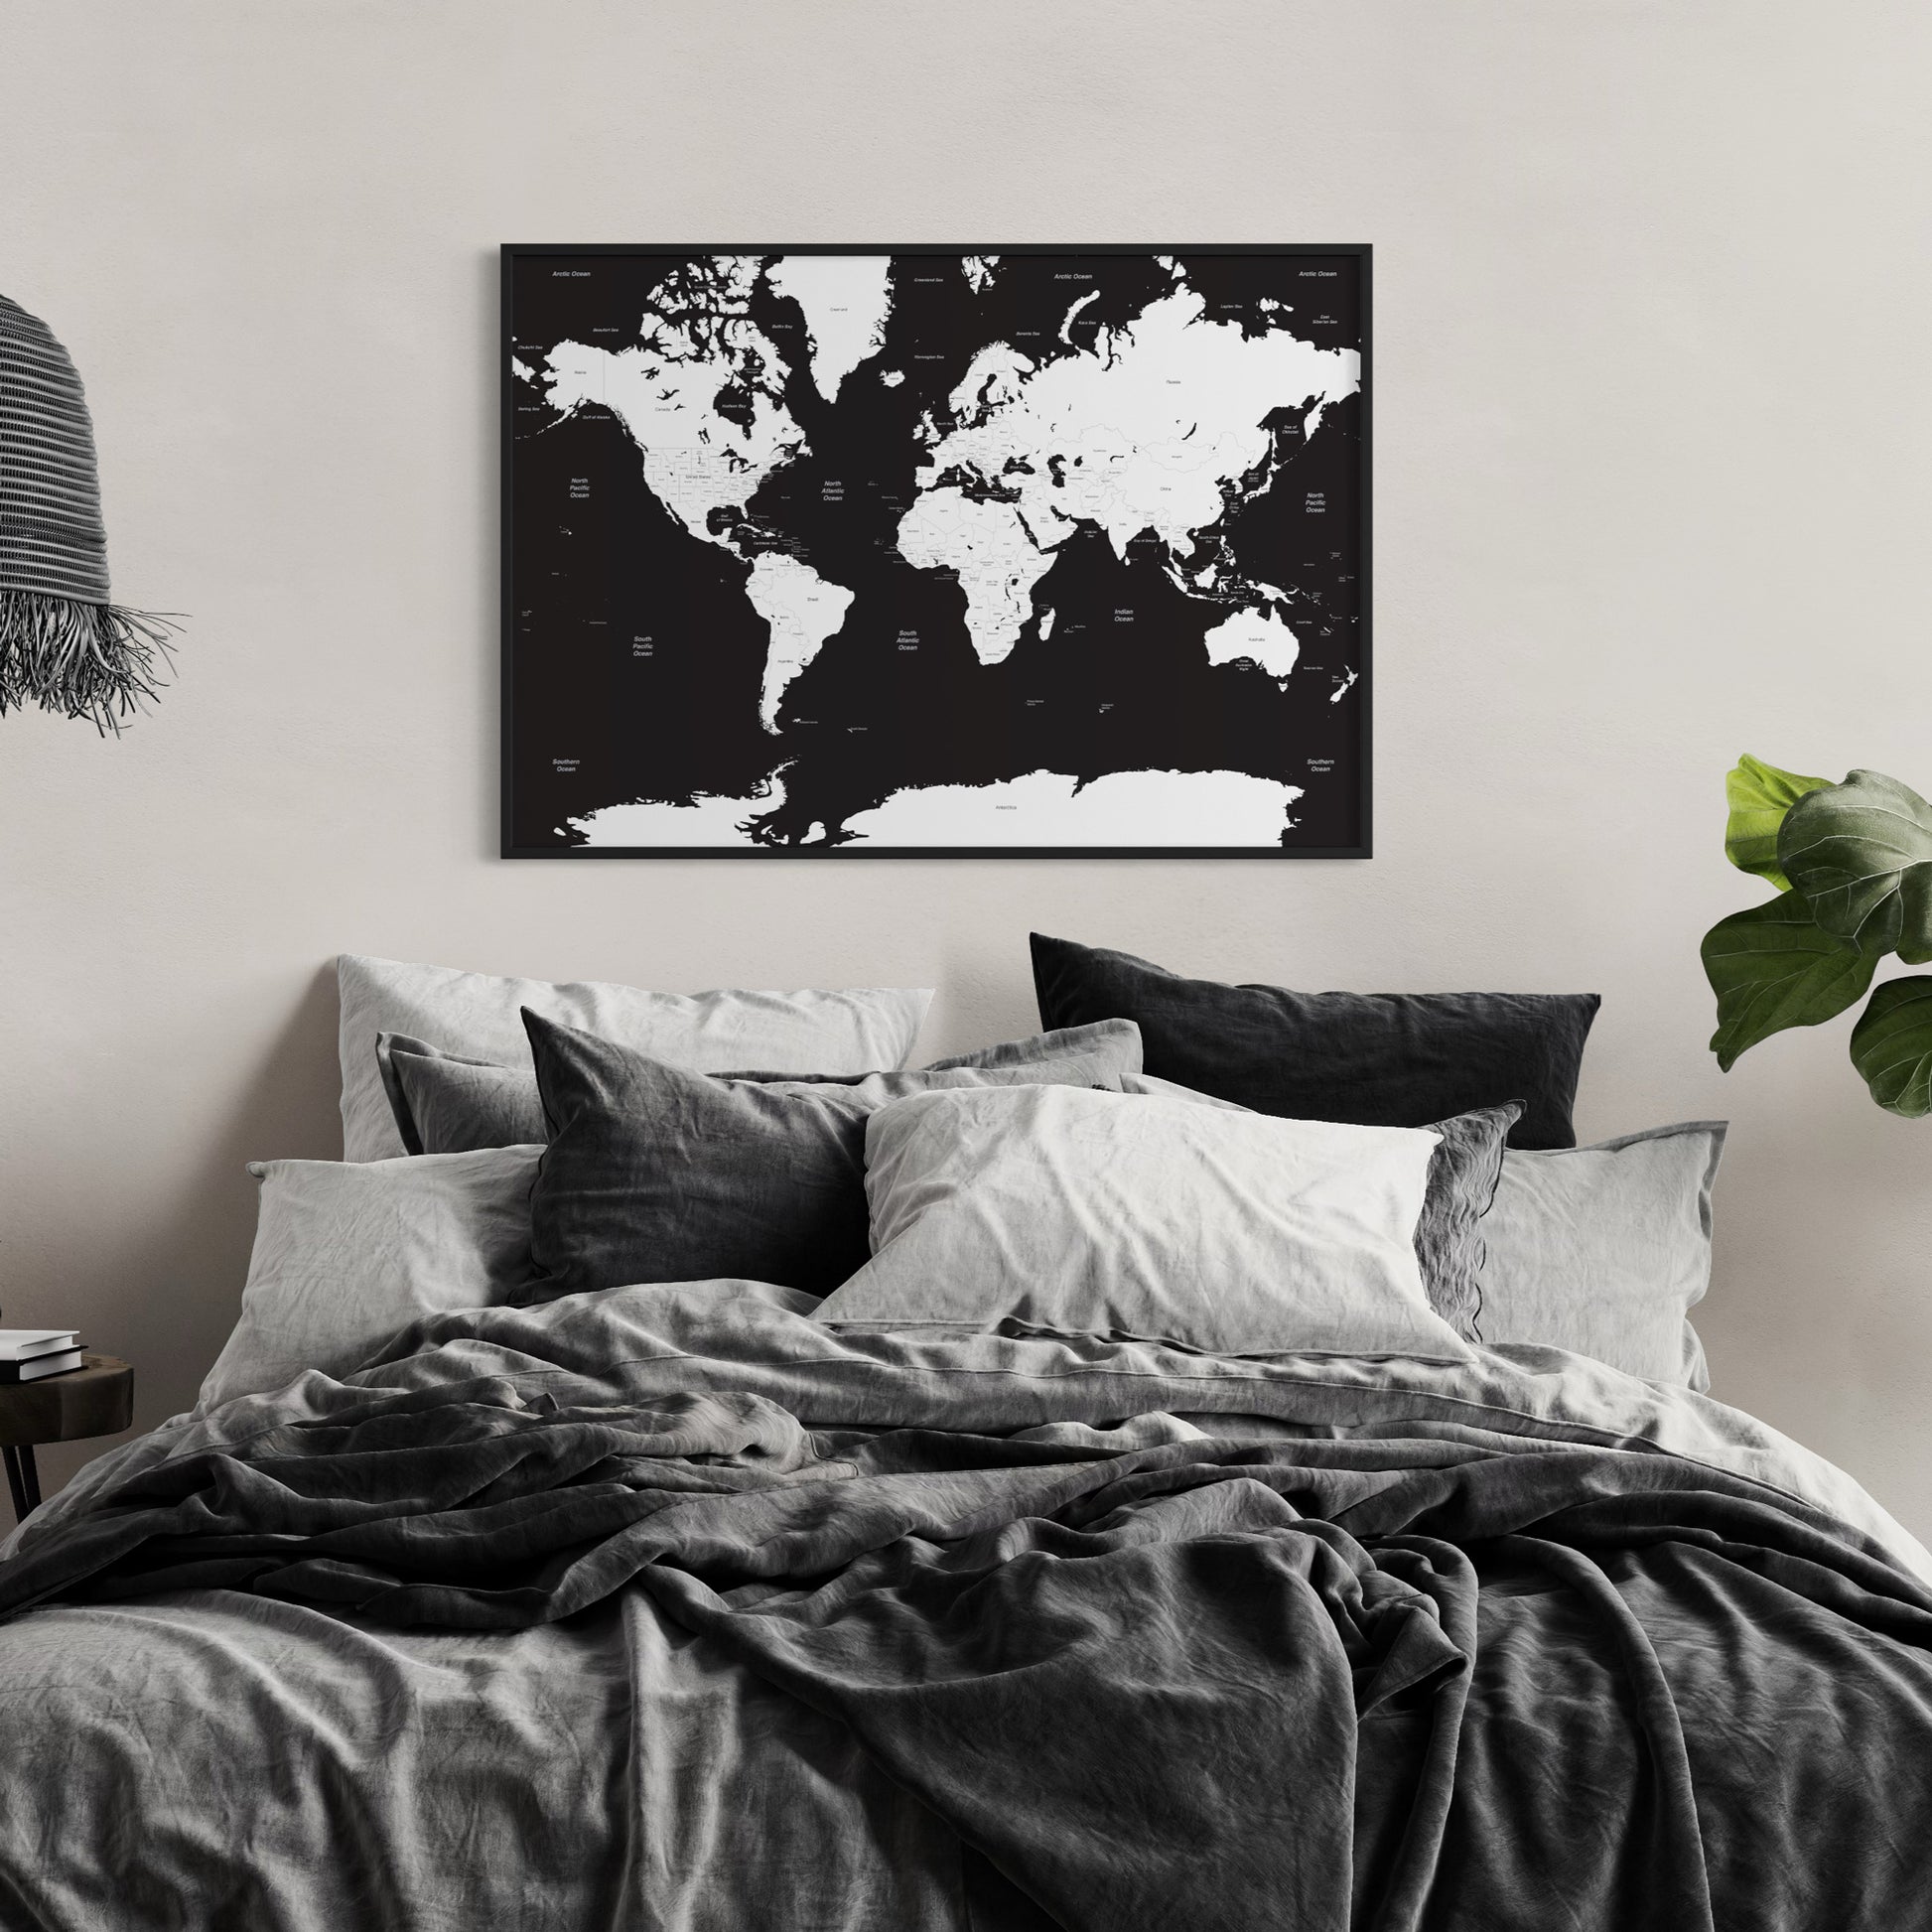 Black Sea White Countries World Map in Bedroom on Wall